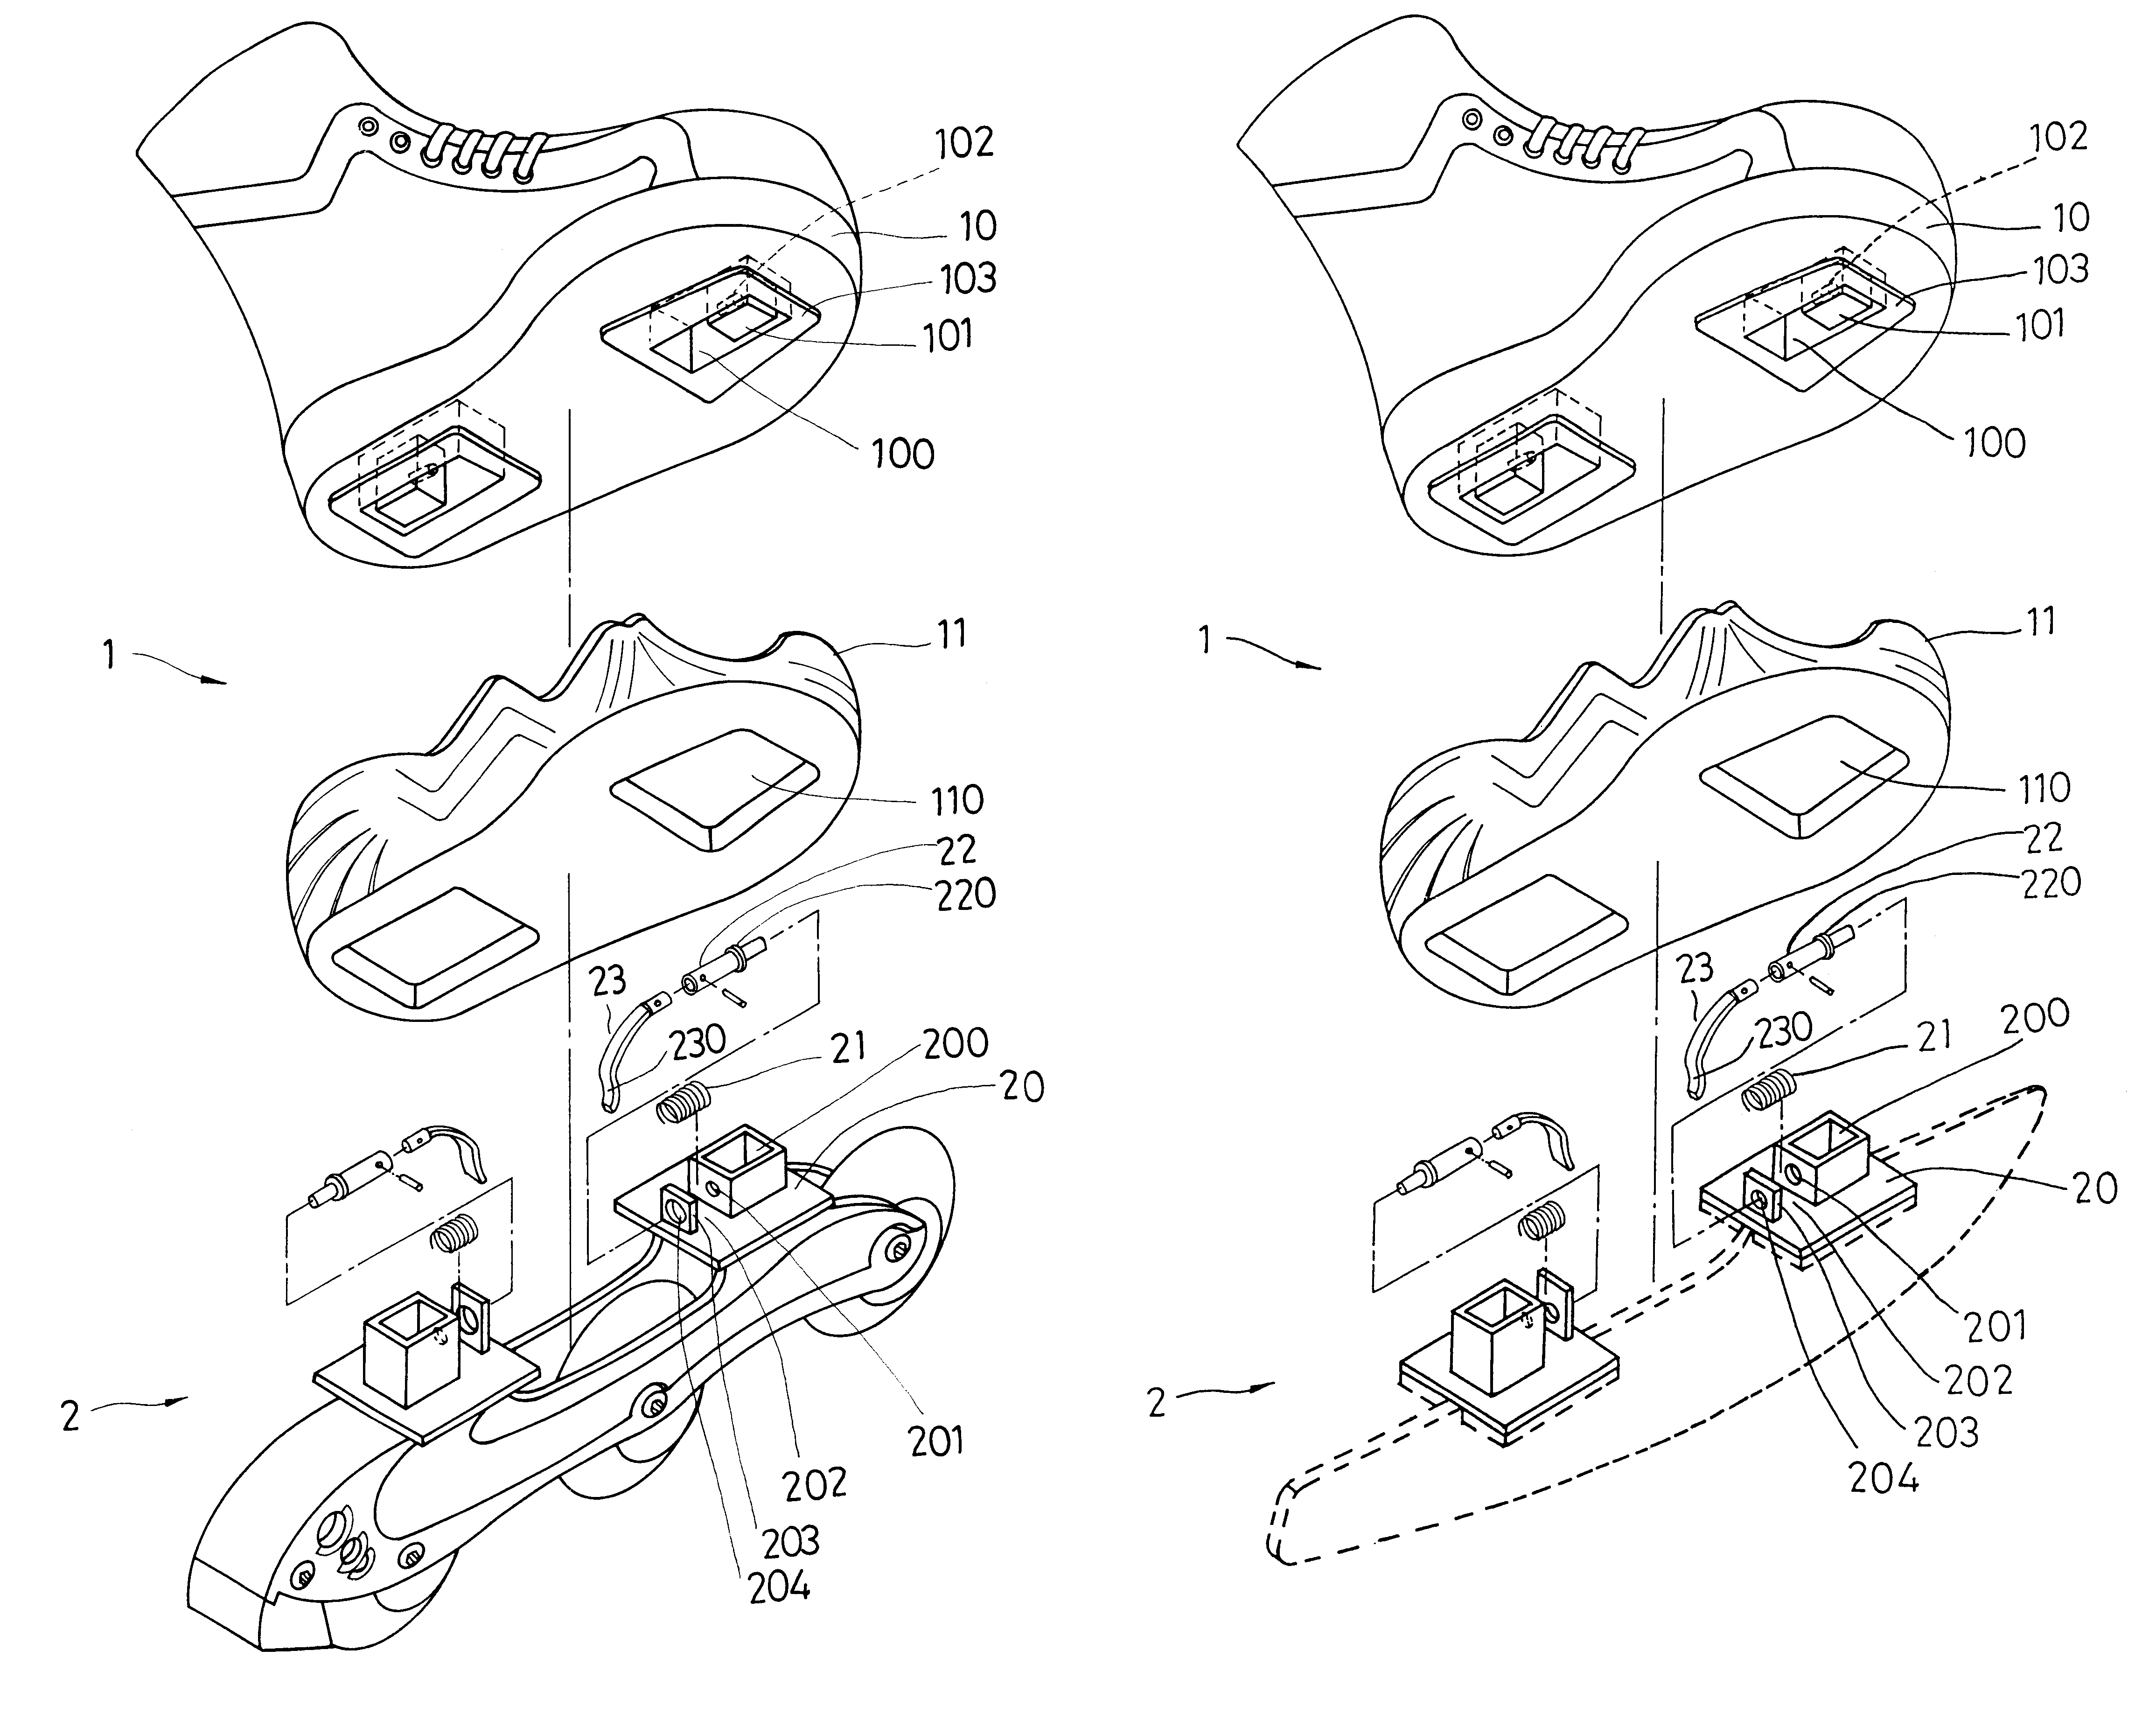 Skate attachable to an athletic shoe